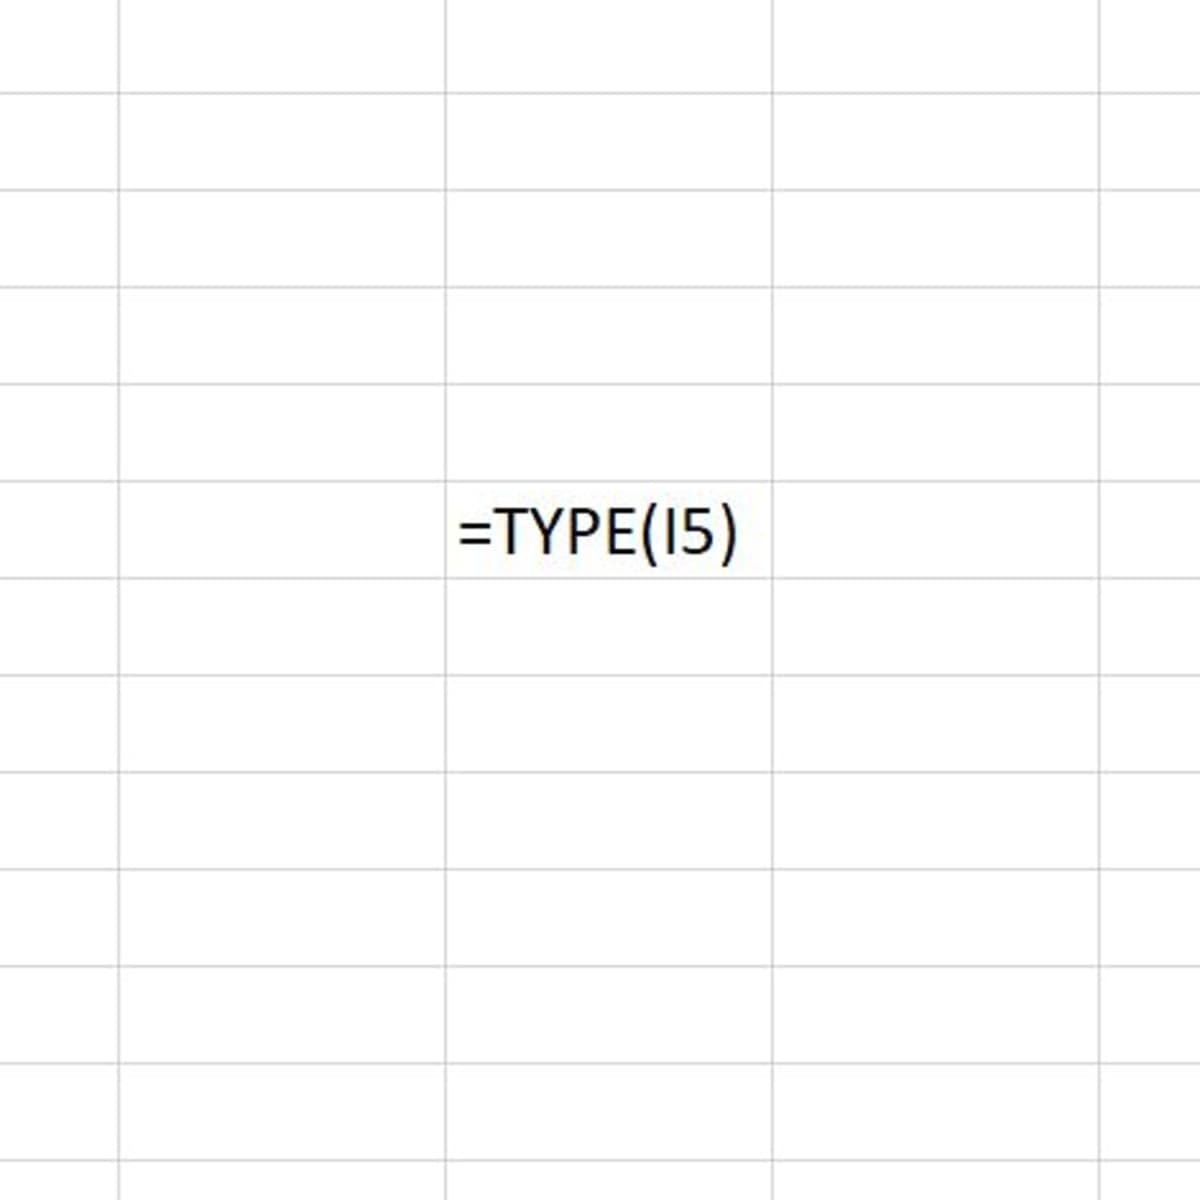 type text in a circle in excel